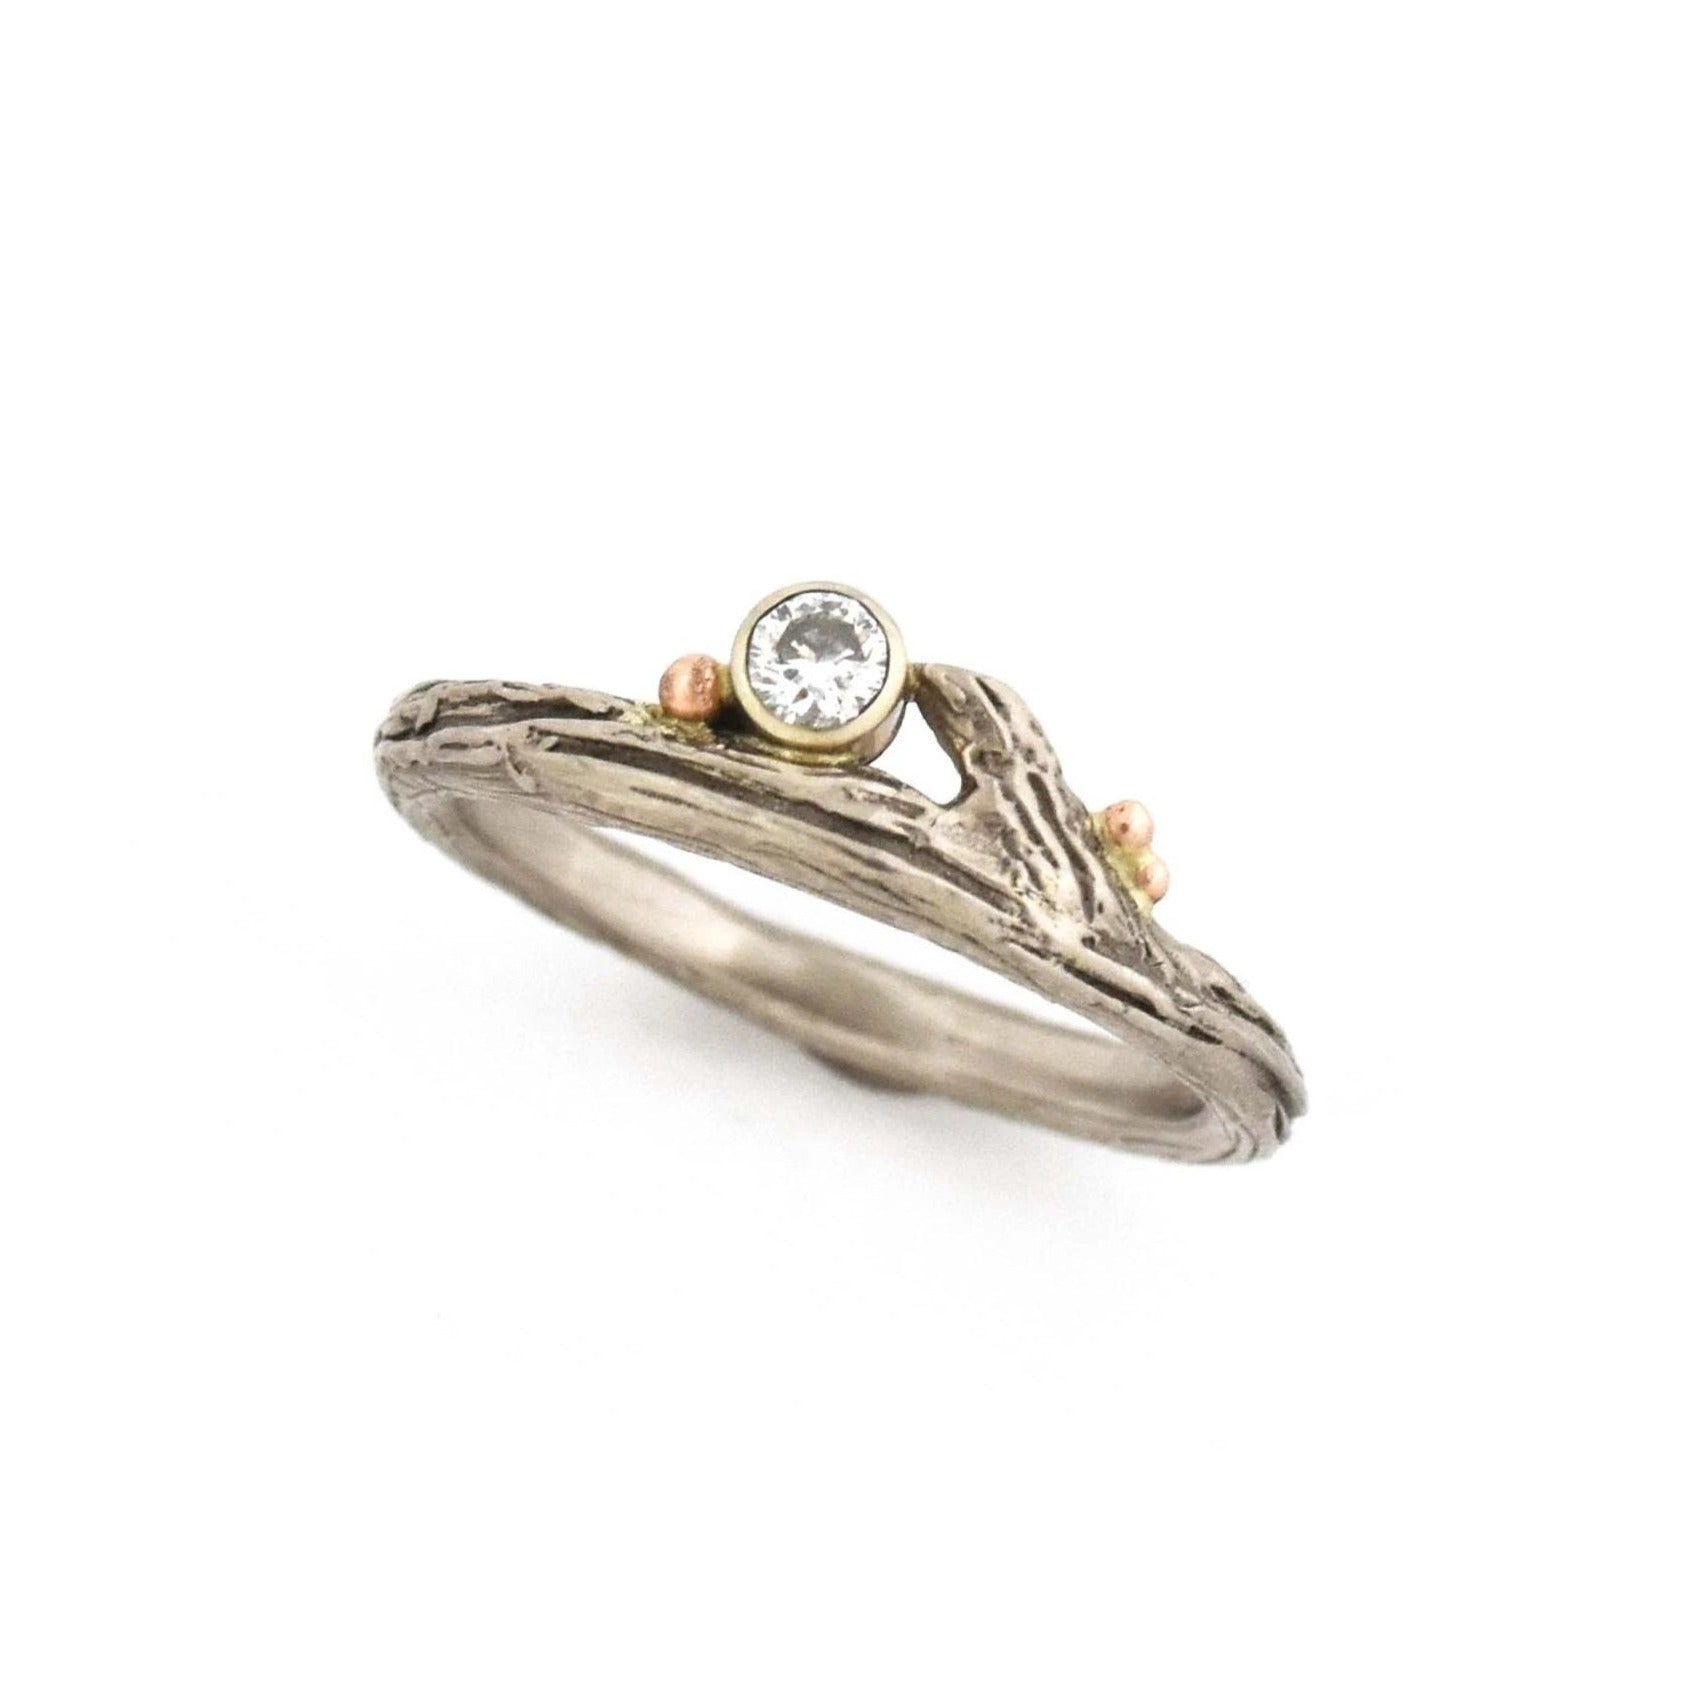 White Gold Diamond & Roses Twig Ring - your choice of stone - Wedding Ring  Select Size / Recycled Diamond  4 / Recycled Diamond 3713 - handmade by Beth Millner Jewelry